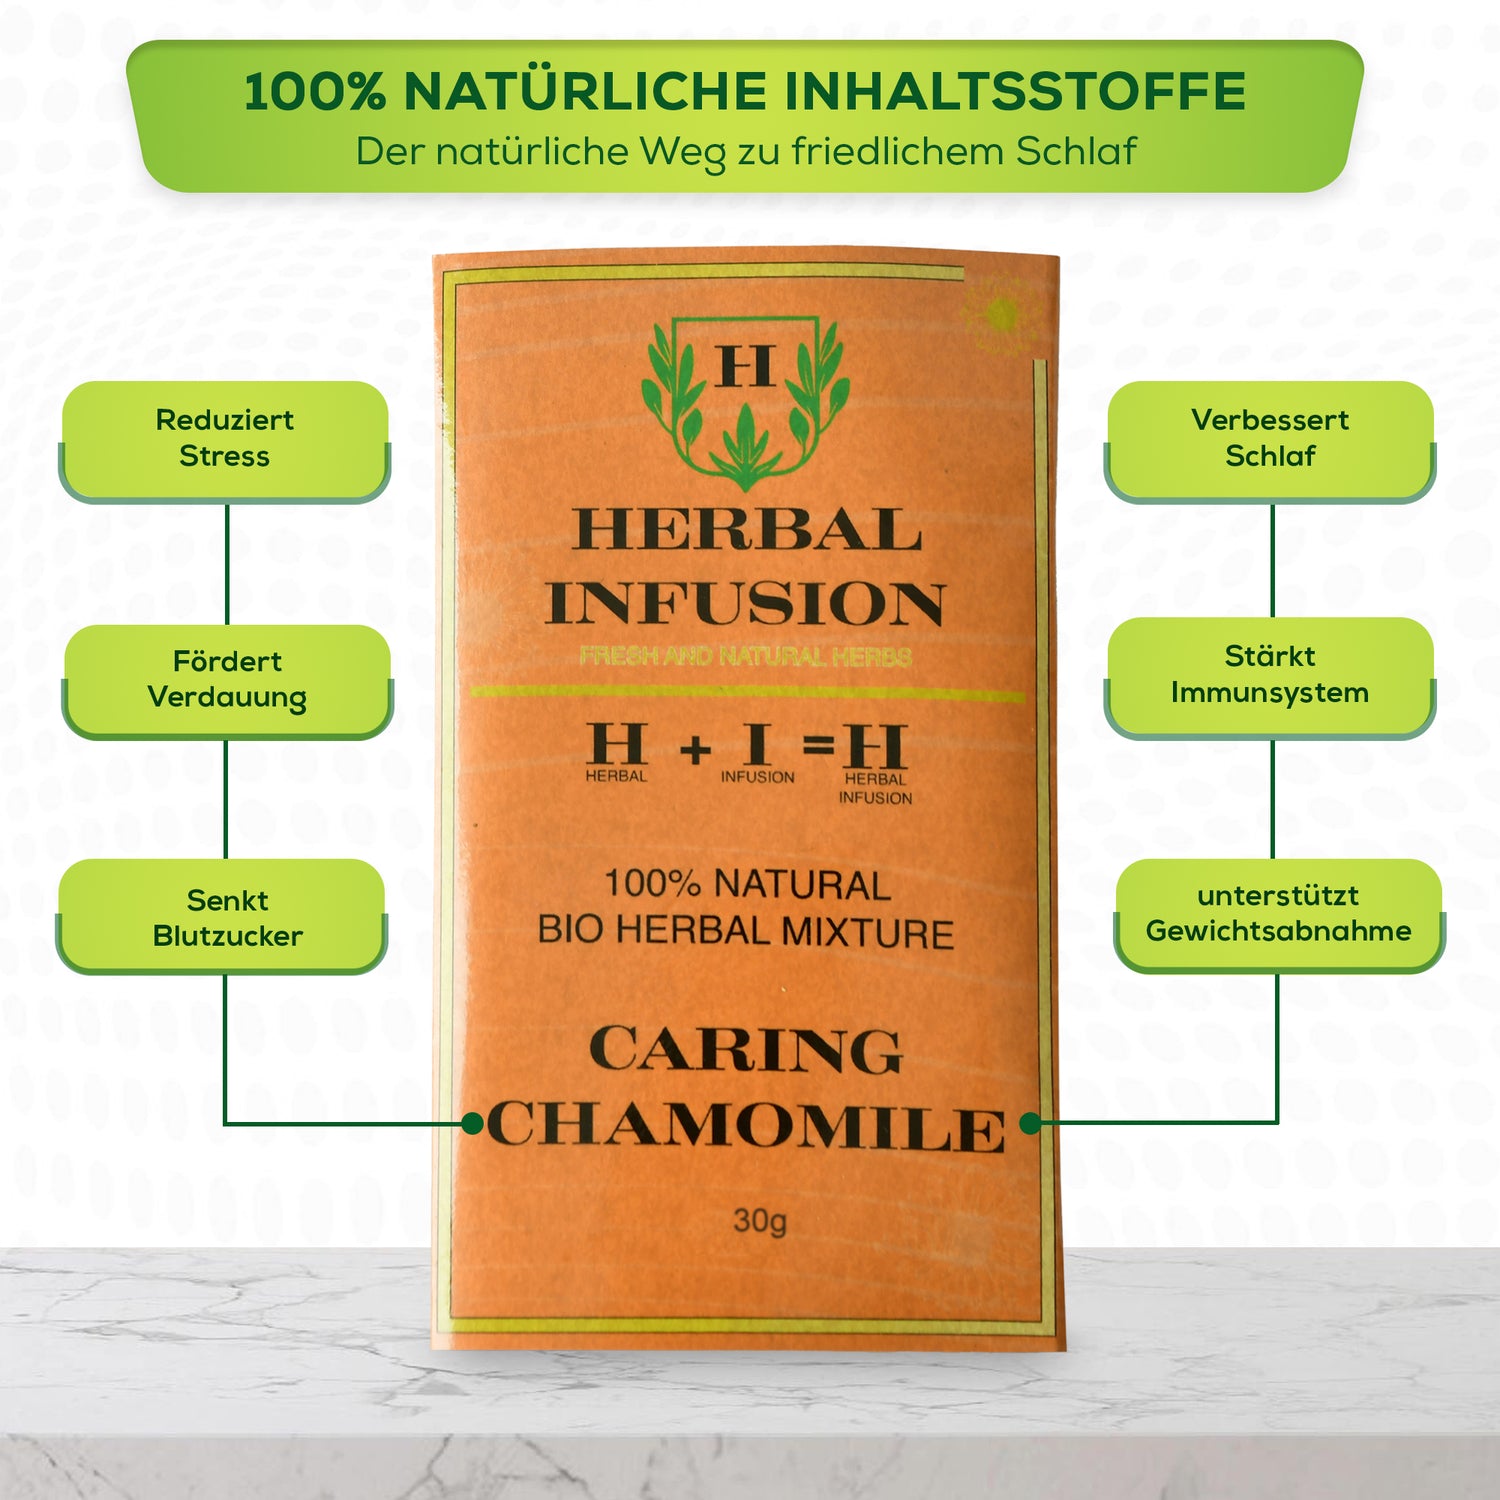 Caring Chamomile - 1 Pack – Herbal Infusion